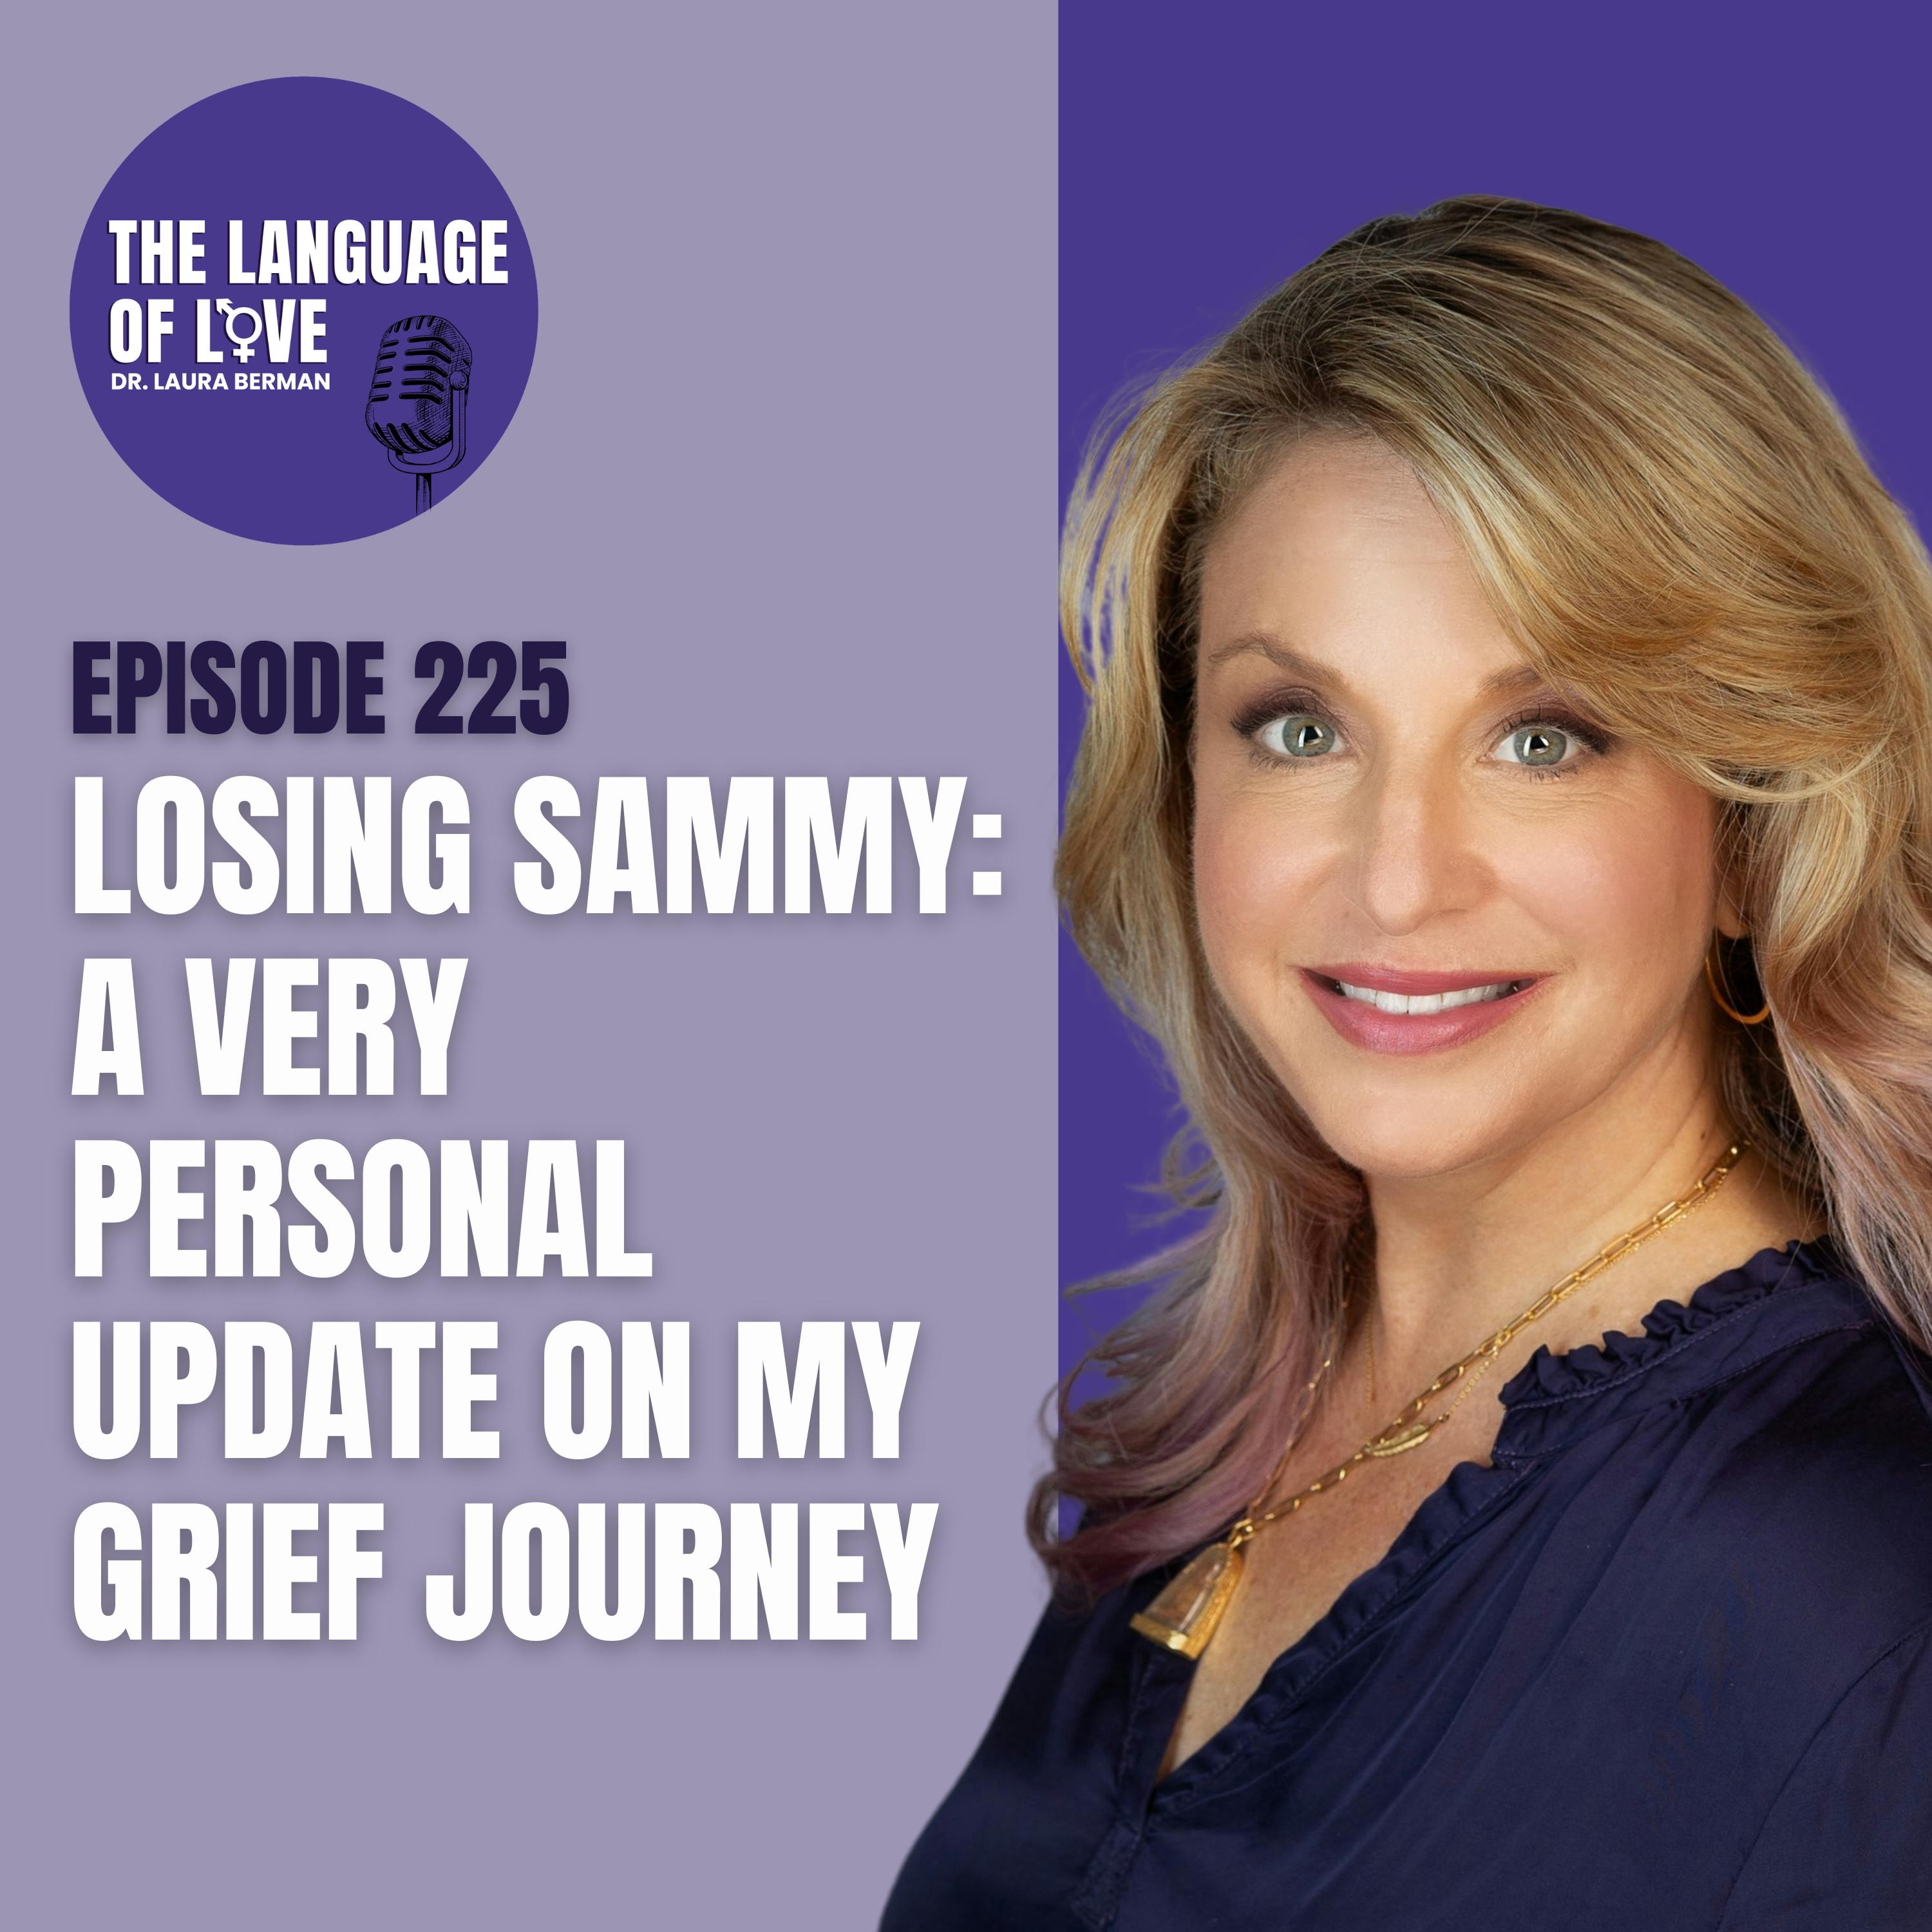 Losing Sammy: A Very Personal Update on My Grief Journey